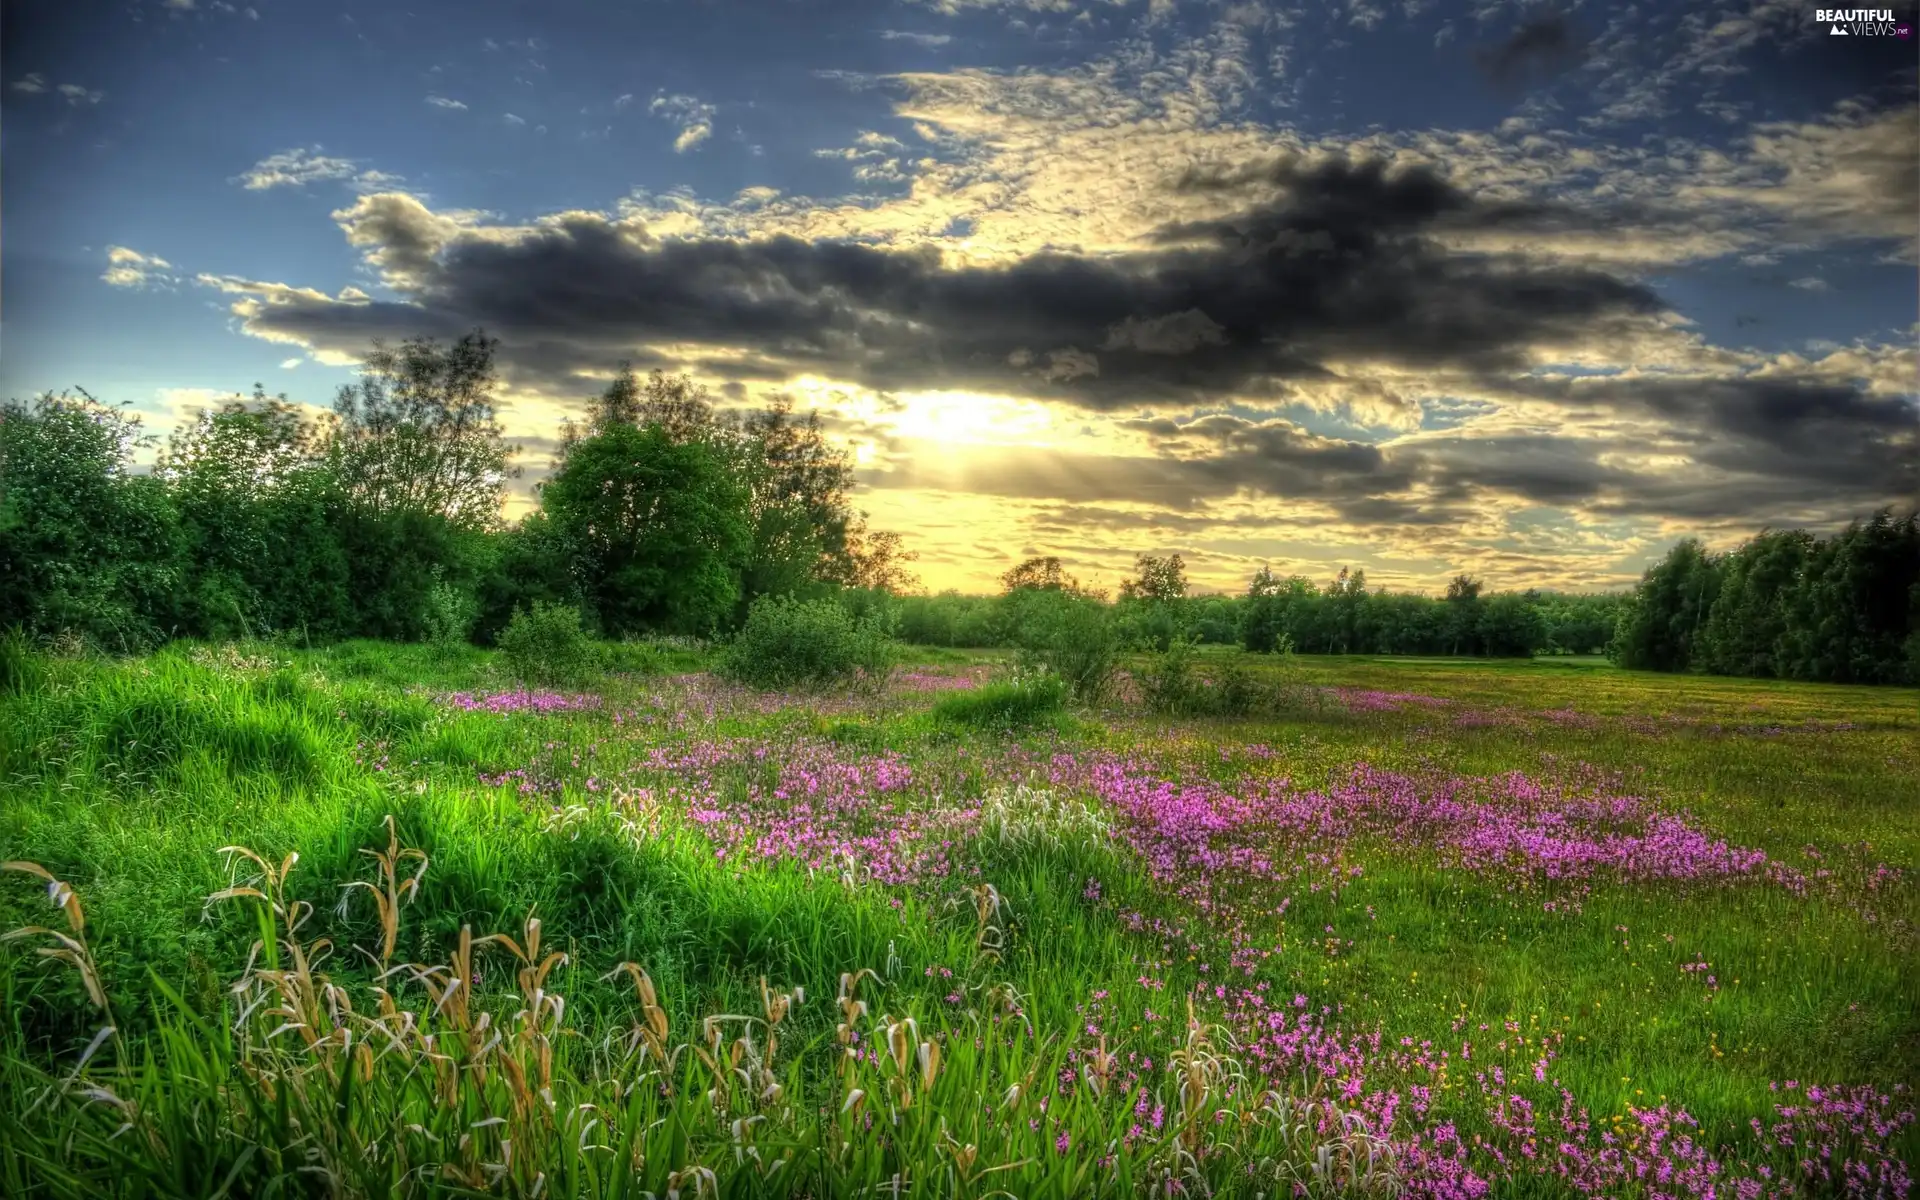 Meadow, west, viewes, Flowers, trees, sun